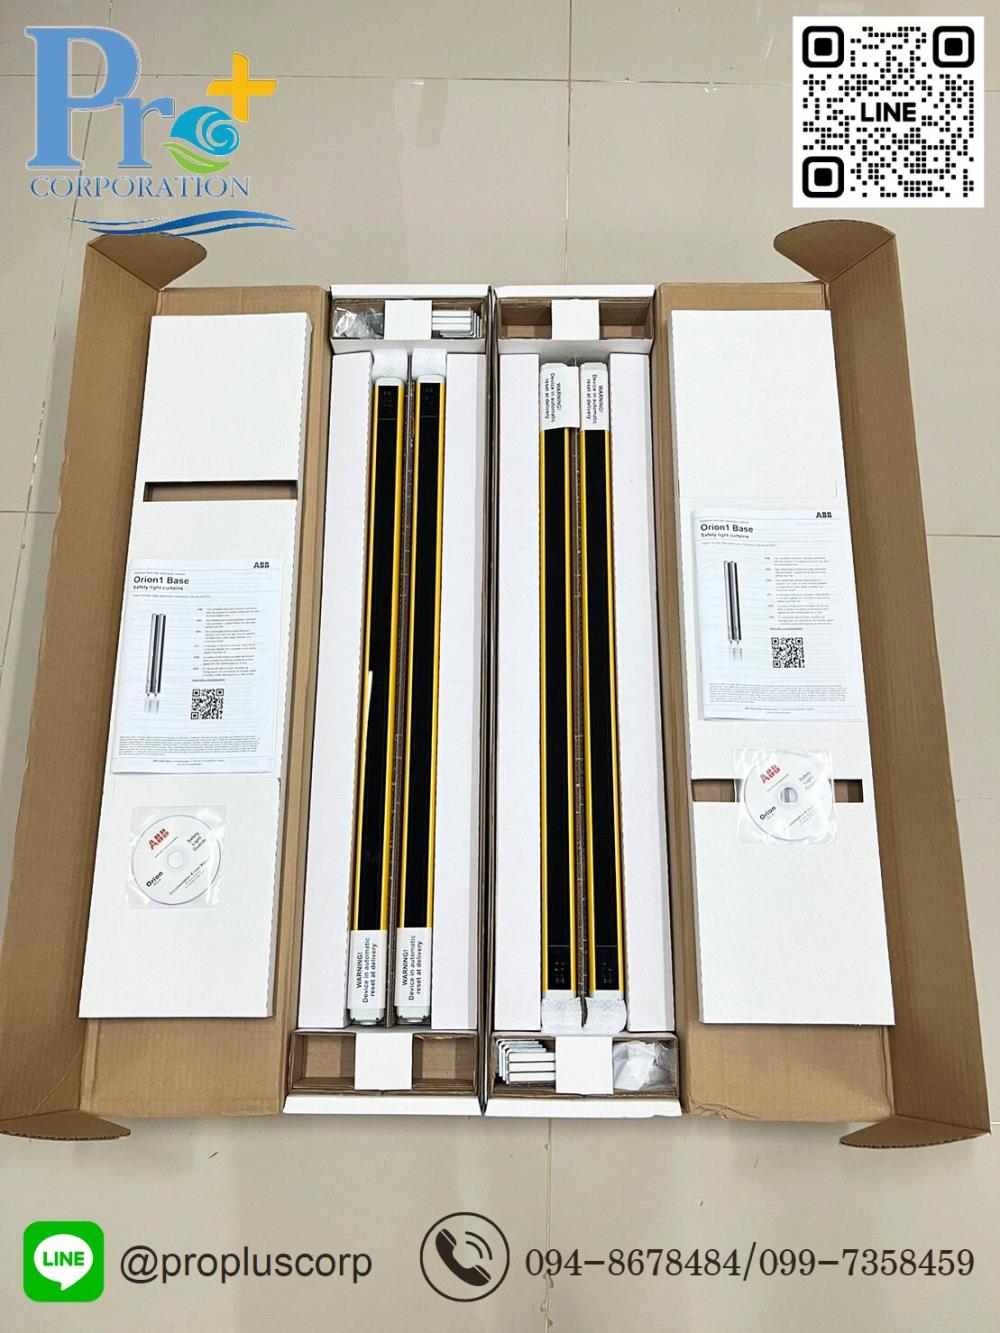 Orion1 Base Light Curtain 2TLA022302R0300 Orion1-4-30-060-B,2TLA022302R0300,ABB,Electrical and Power Generation/Safety Equipment